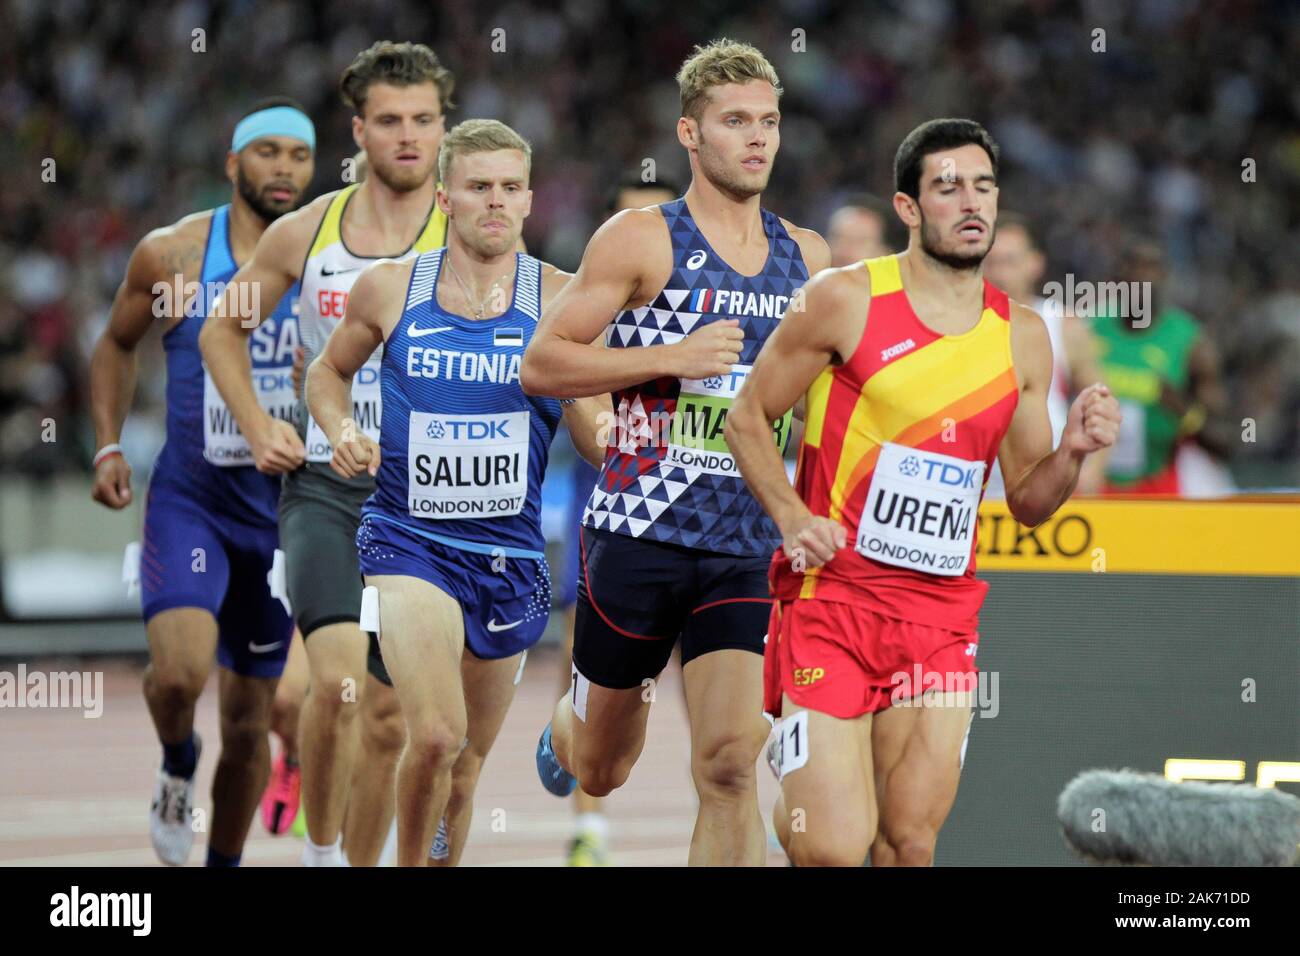 Jorge Ureña (Spain) , Kevin Mayerl (French ) and Karl-Robert Saluri  (Estonie) during the 1500 m Decathlon men of the IAAF World Athletics  Championships on August 6, 201 at the Olympic stadium